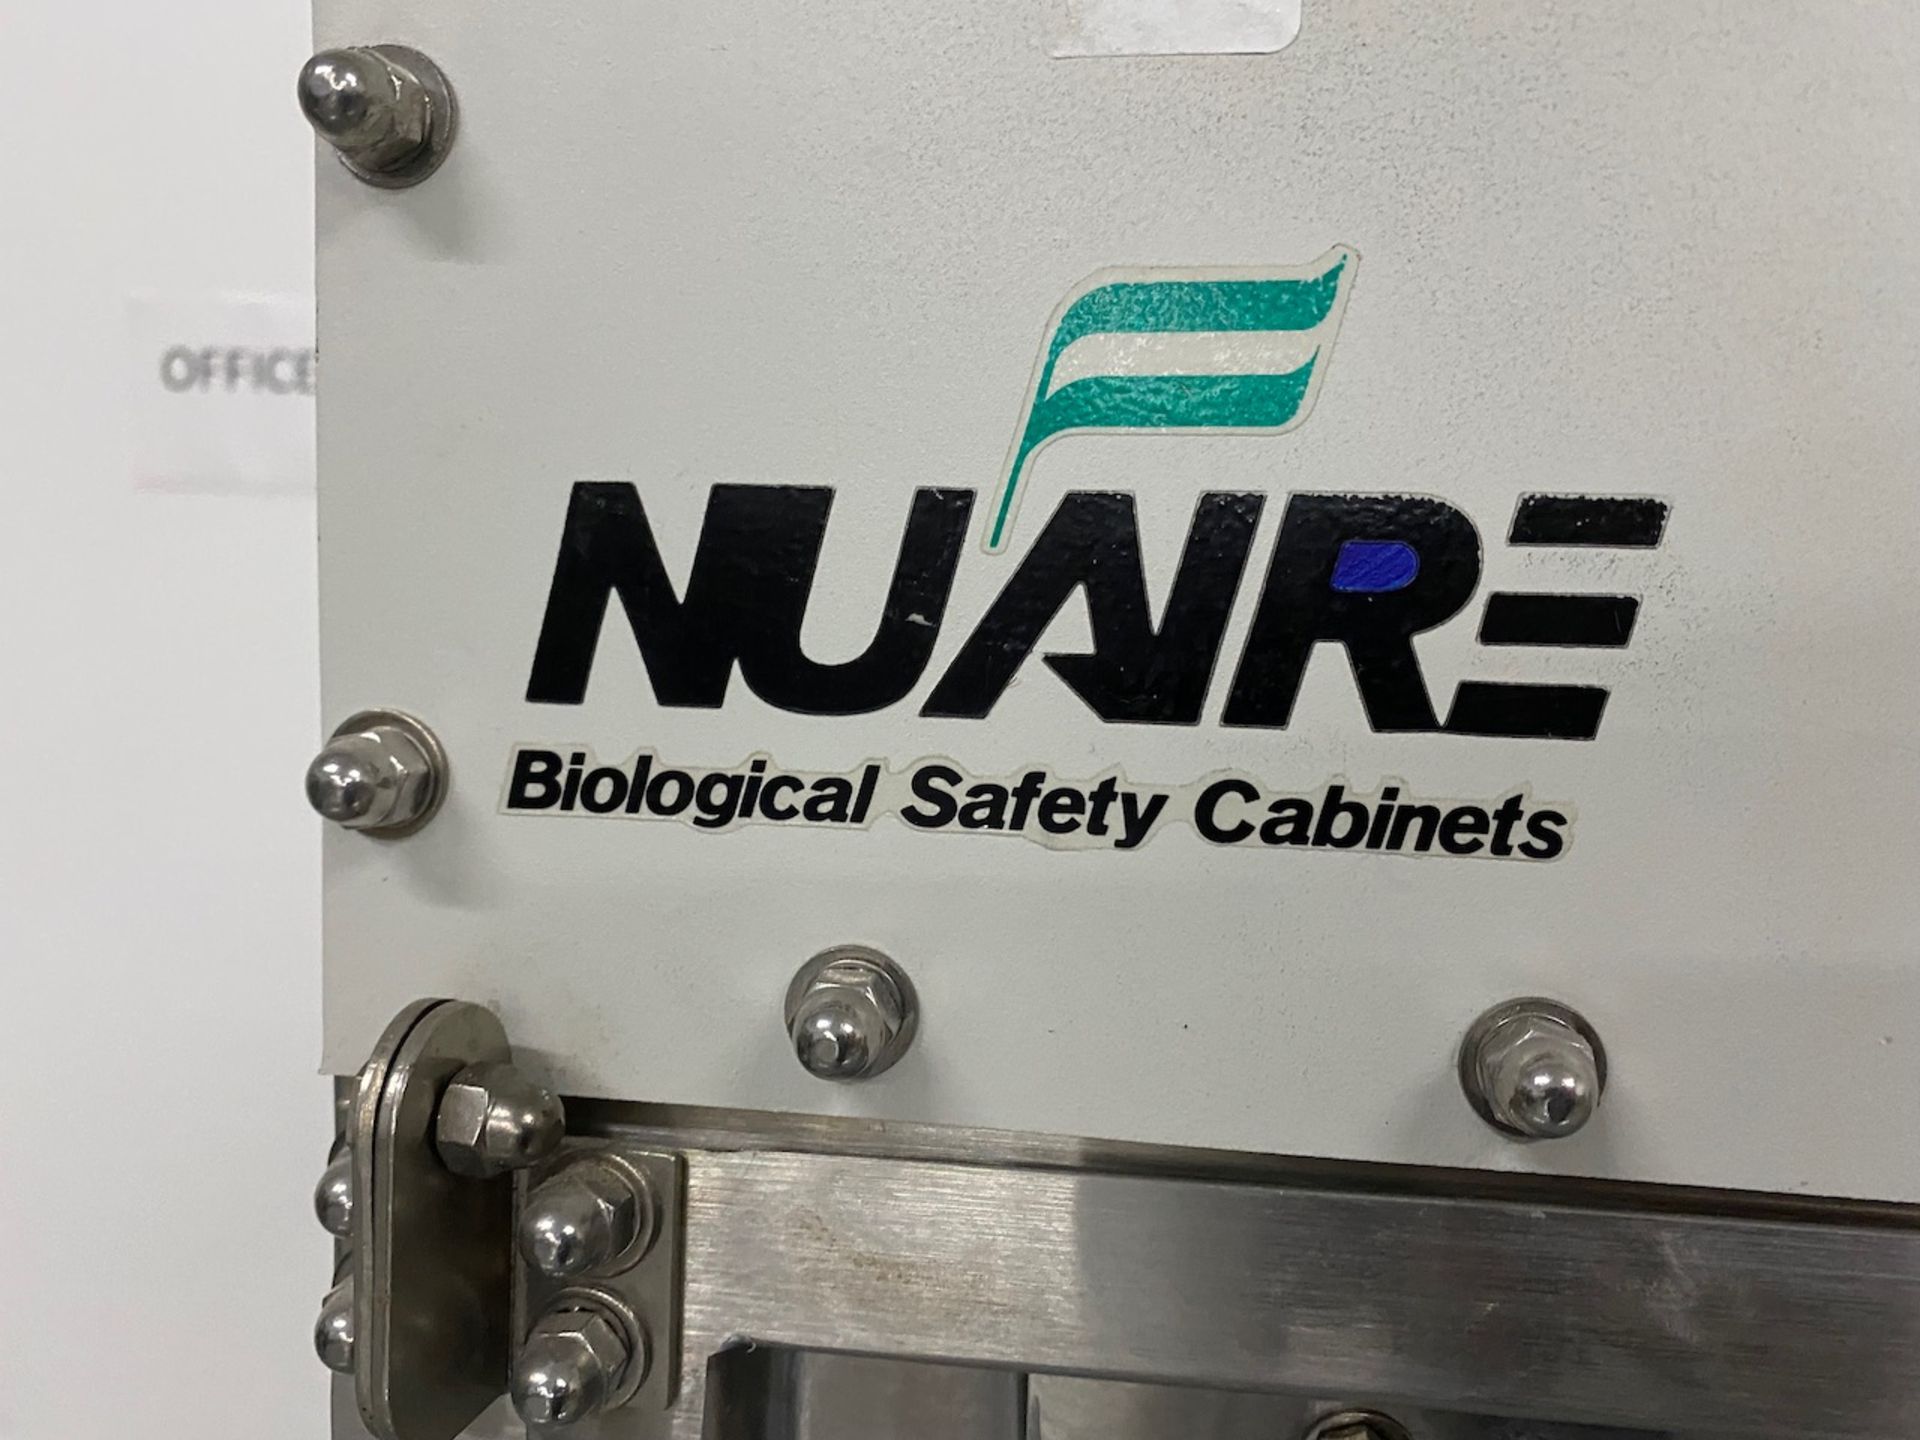 Nuaire Bio Safety Cabinet - Image 4 of 4